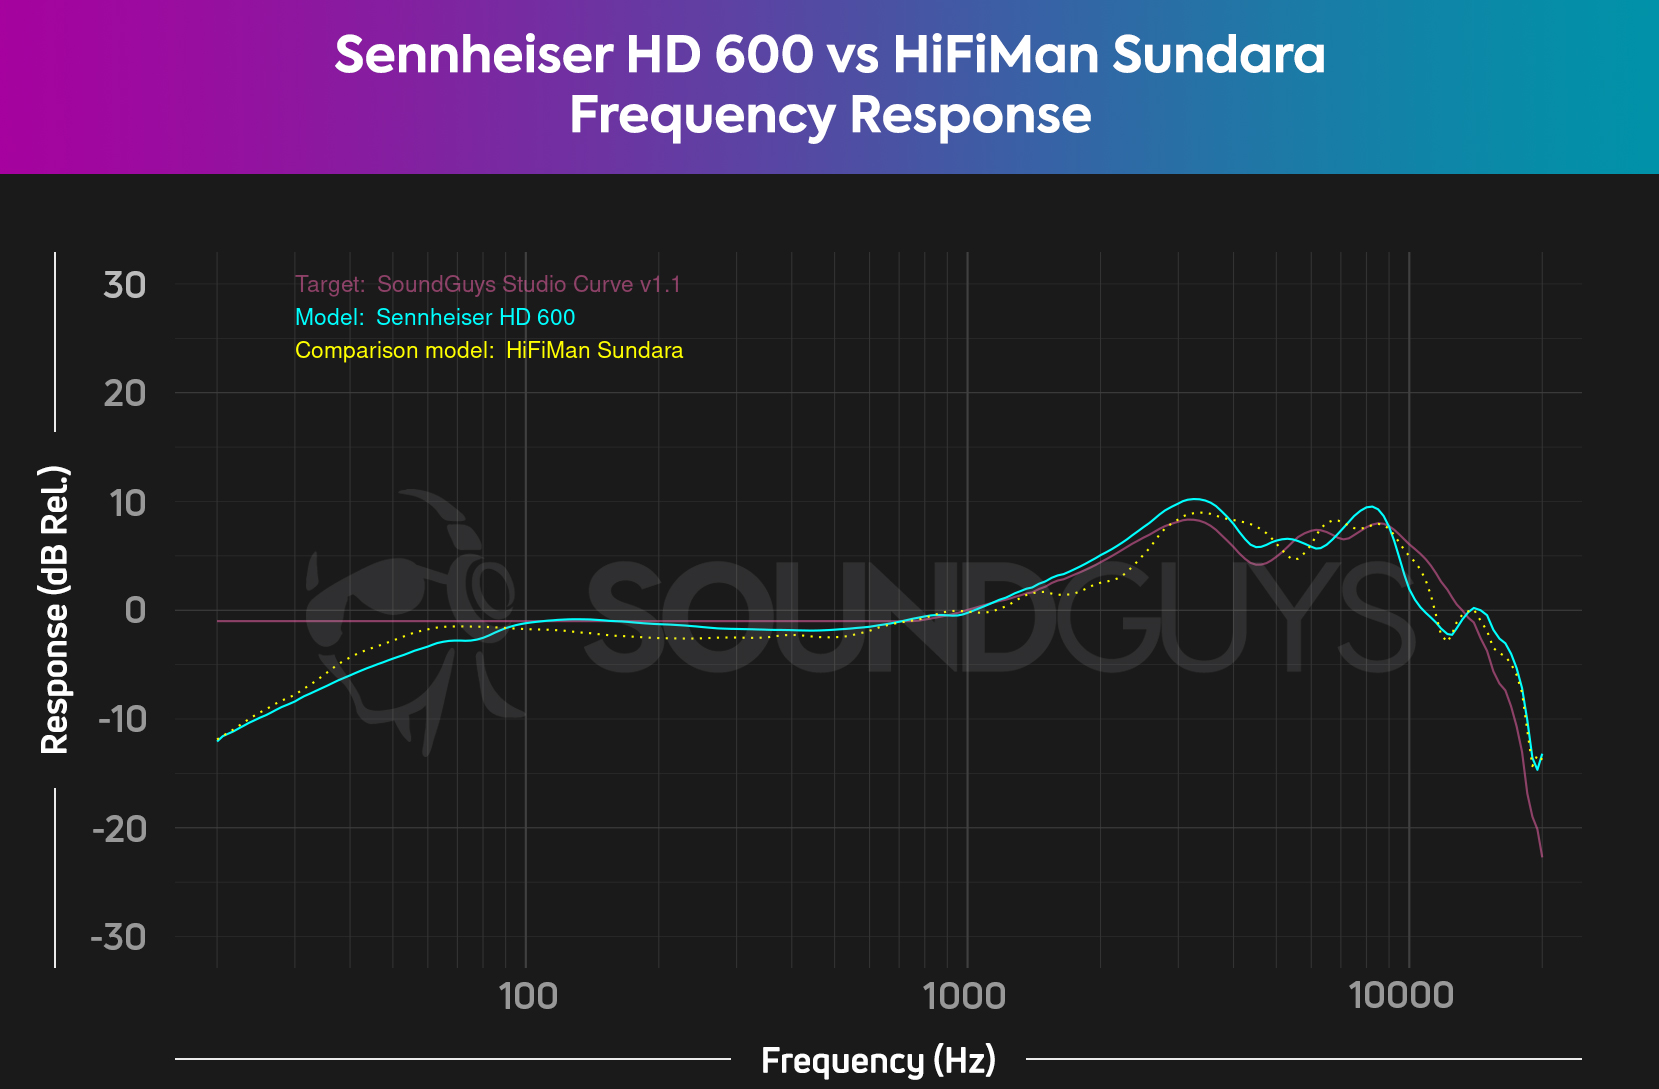 The HiFiMan Sindara is very comparable to the Sennheiser HD 600, though it has other tradeoffs.